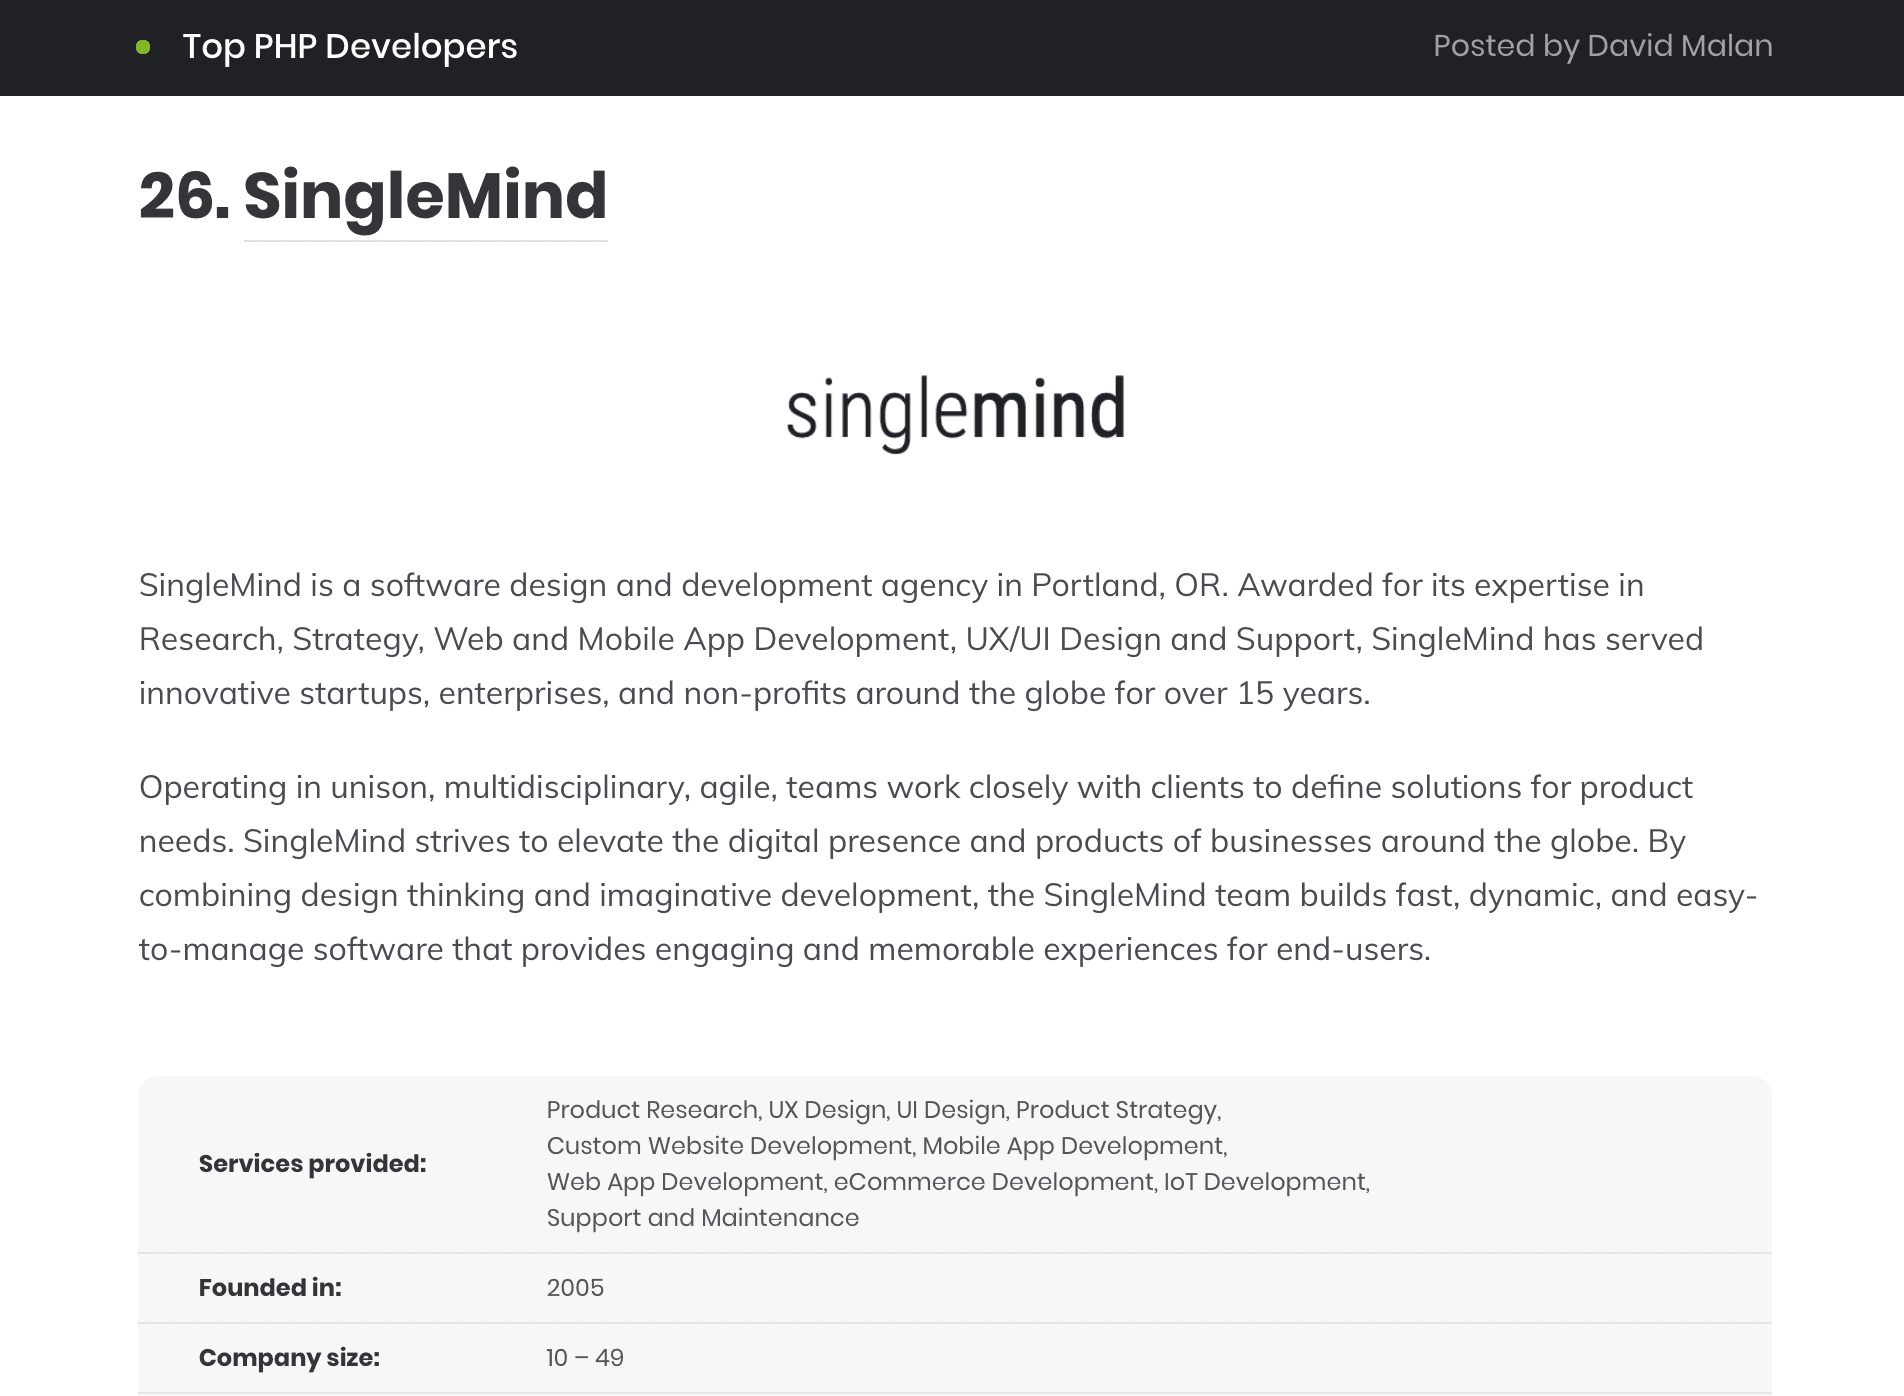 SingleMind Web Design and Development Profile on Techrevier.co as a Top PHP Developer